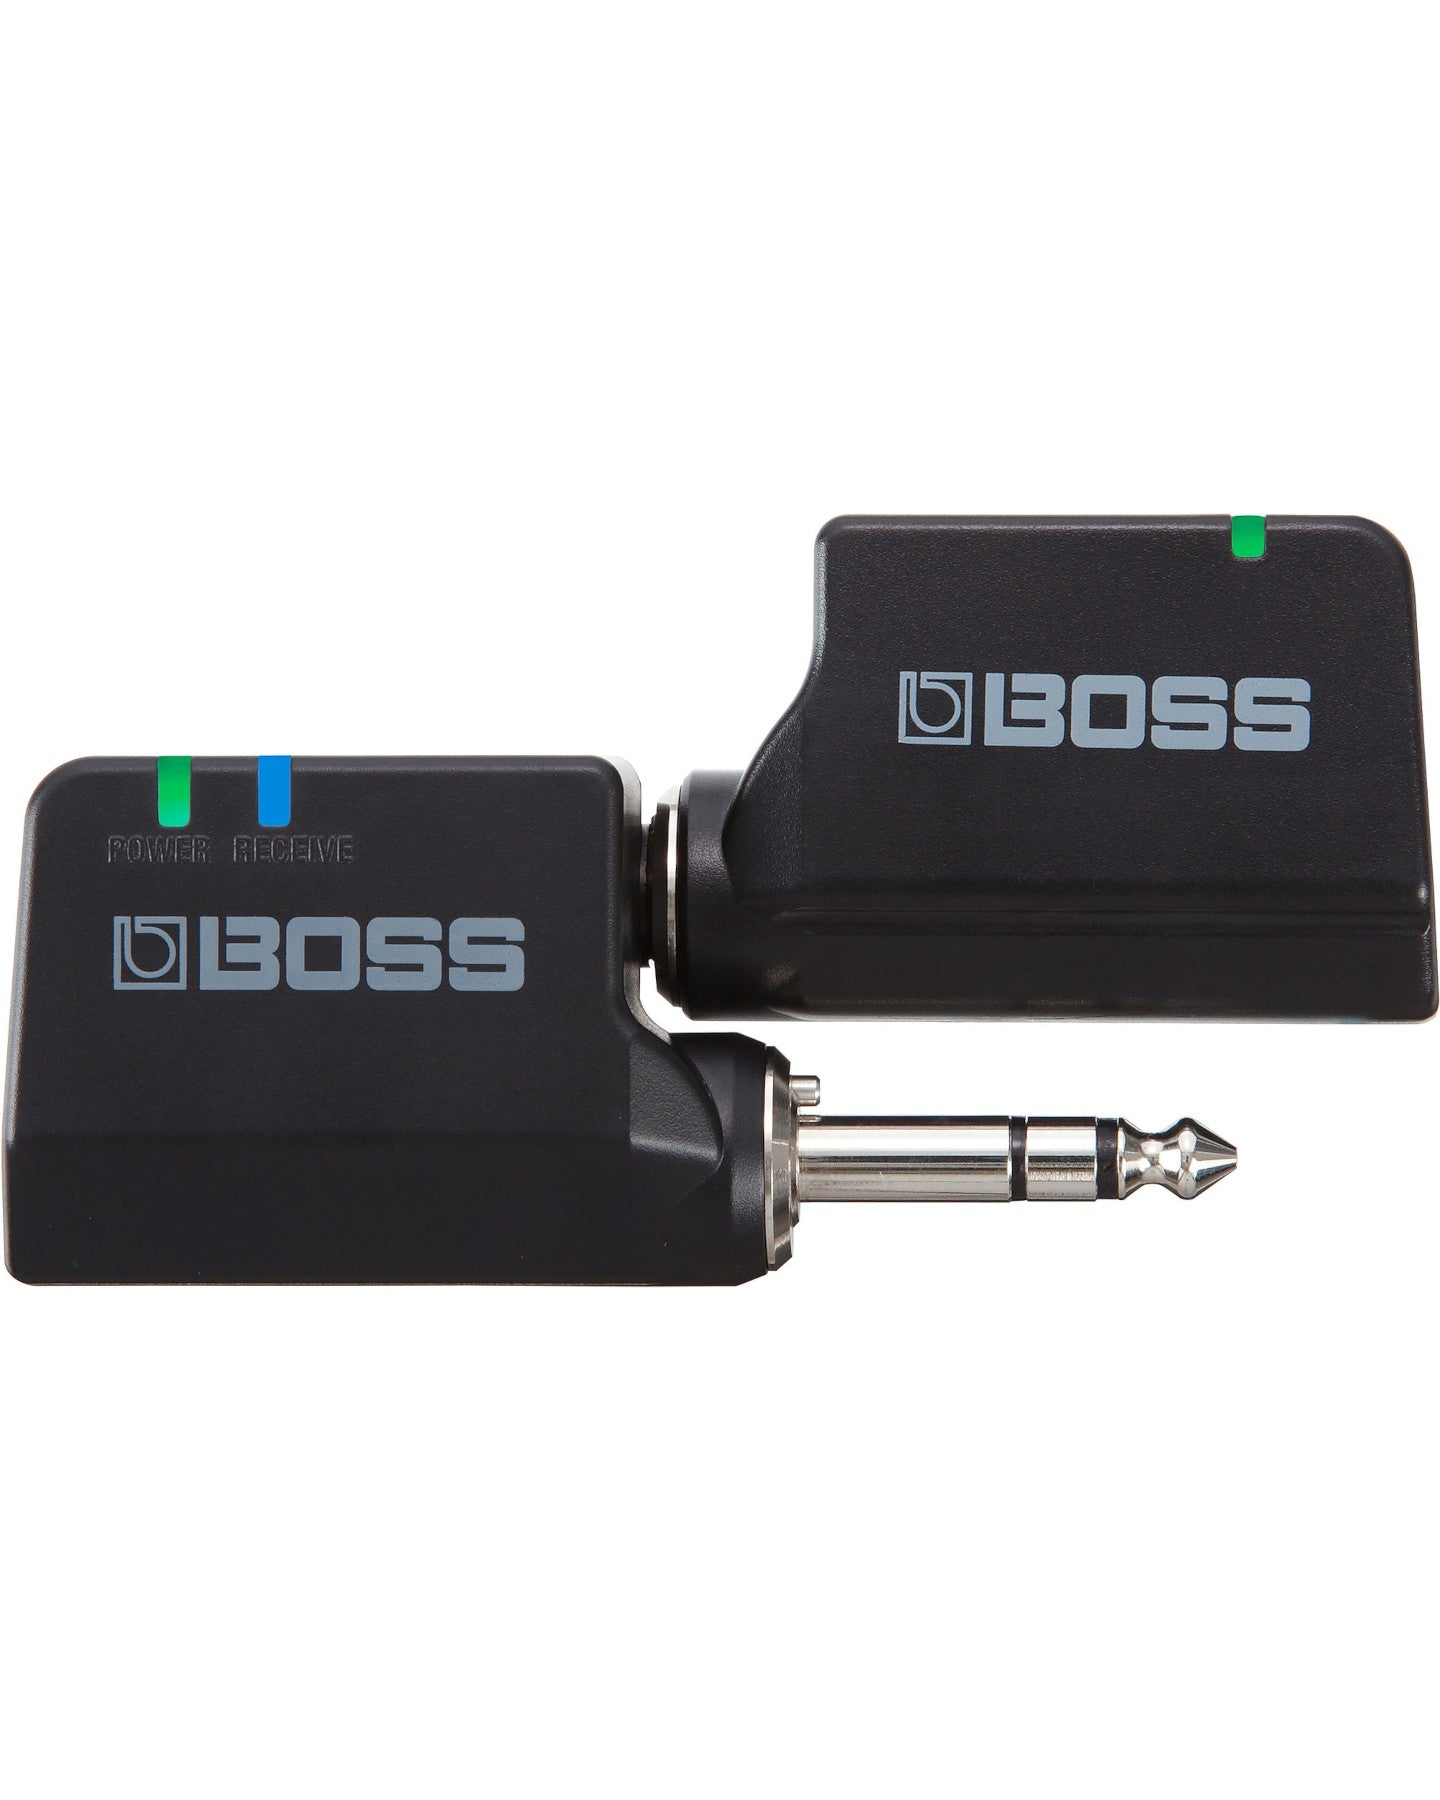 Plug-and-Play Wireless System